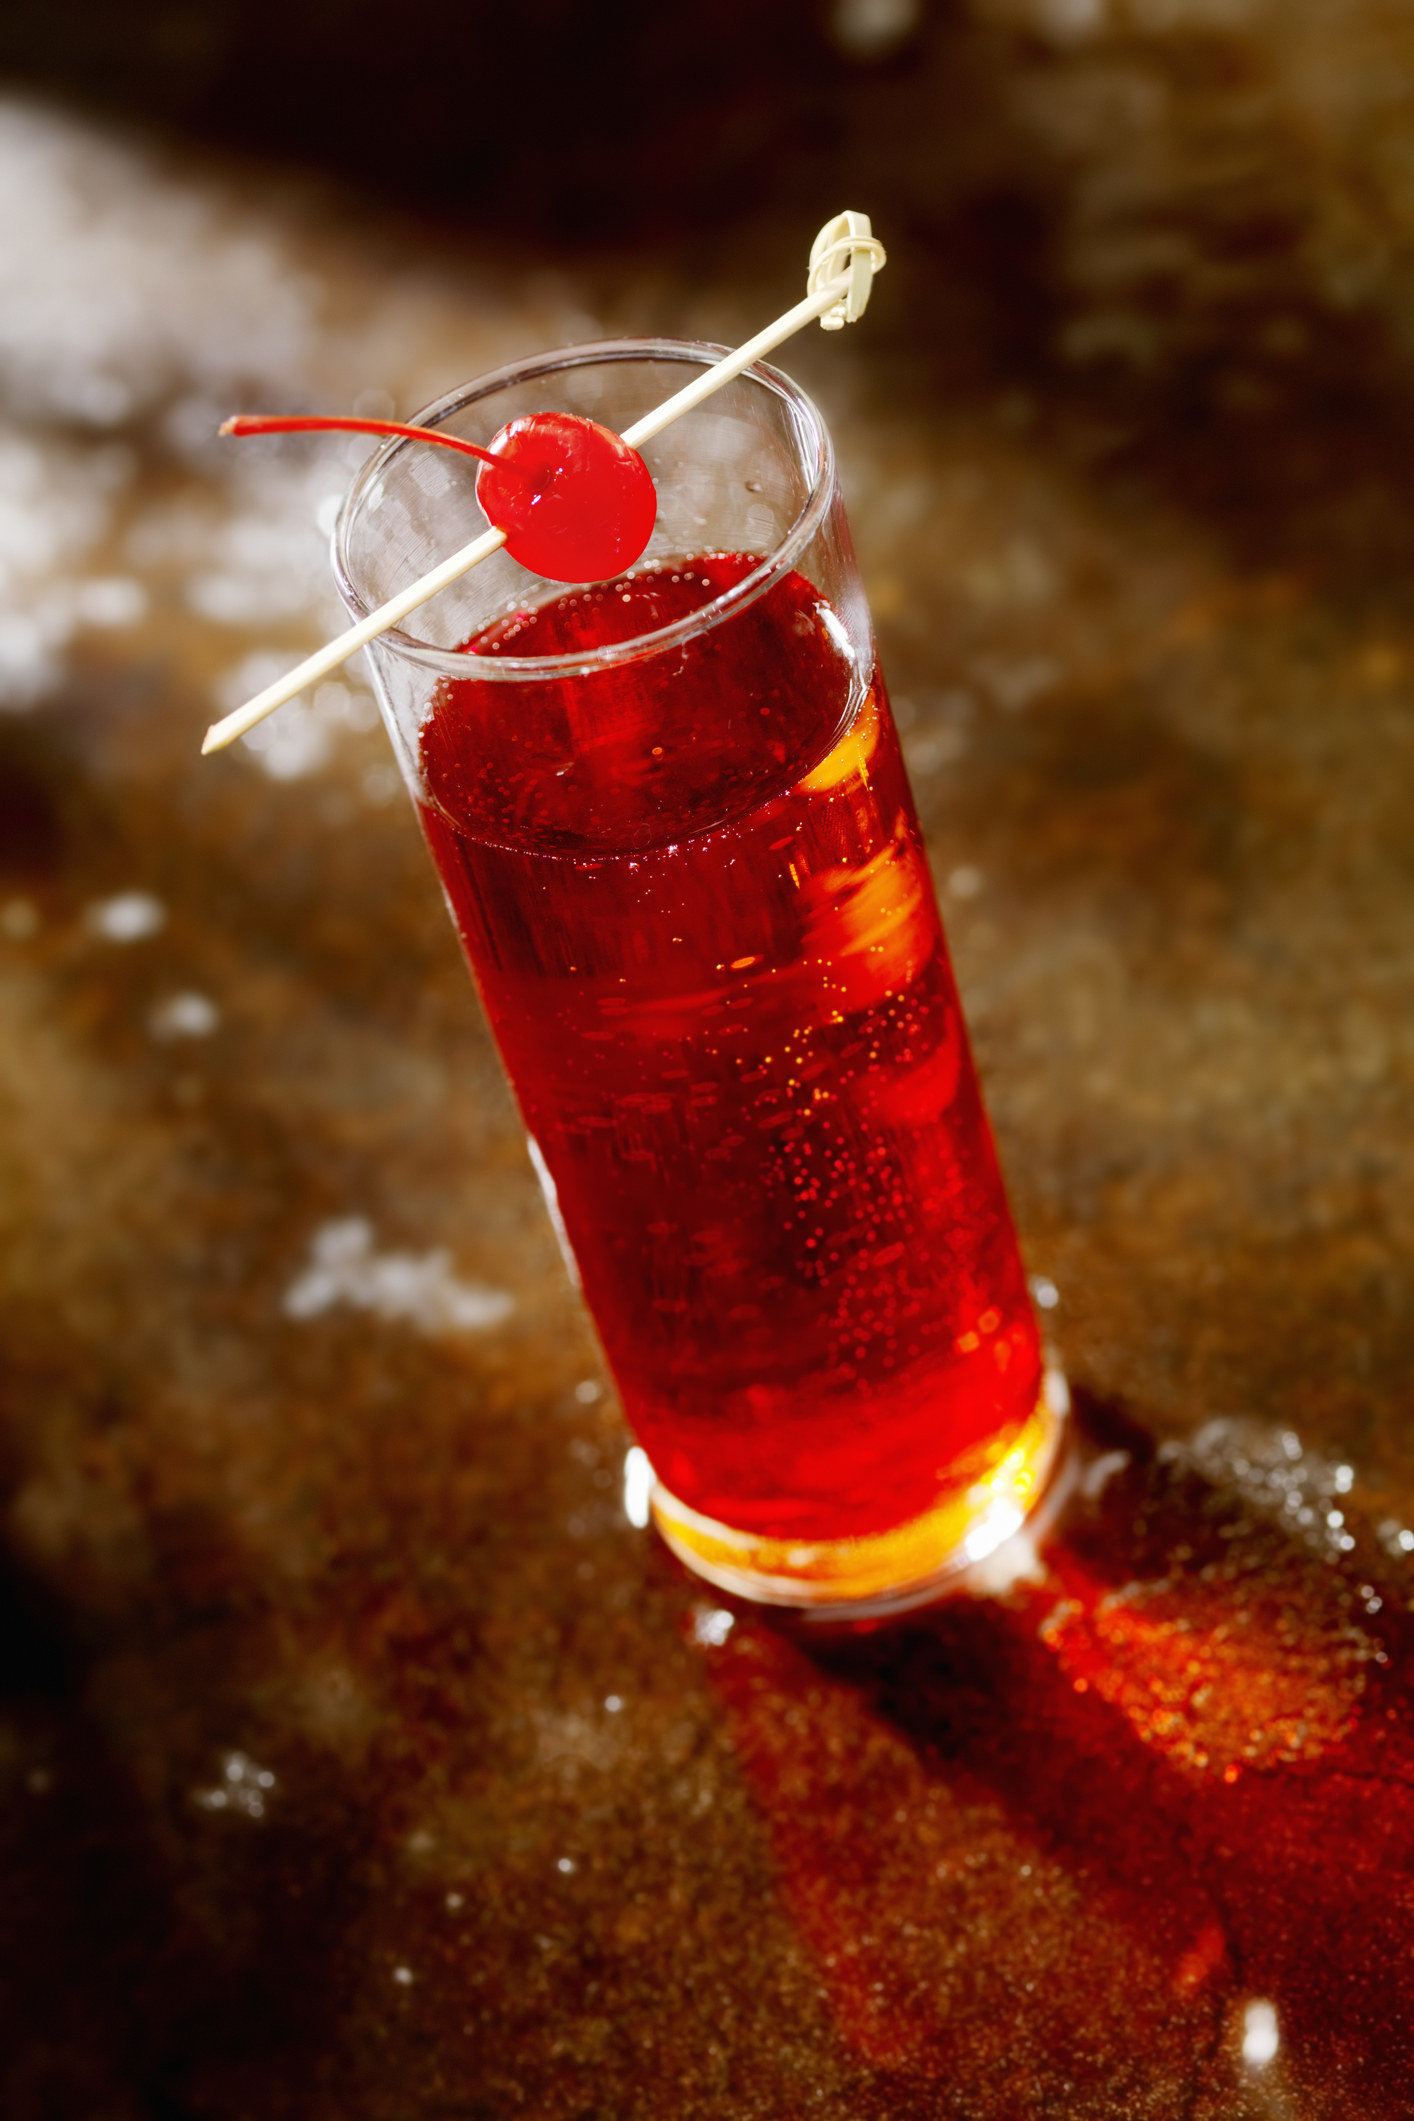 A red drink in a tall glass with a cherry on a stick